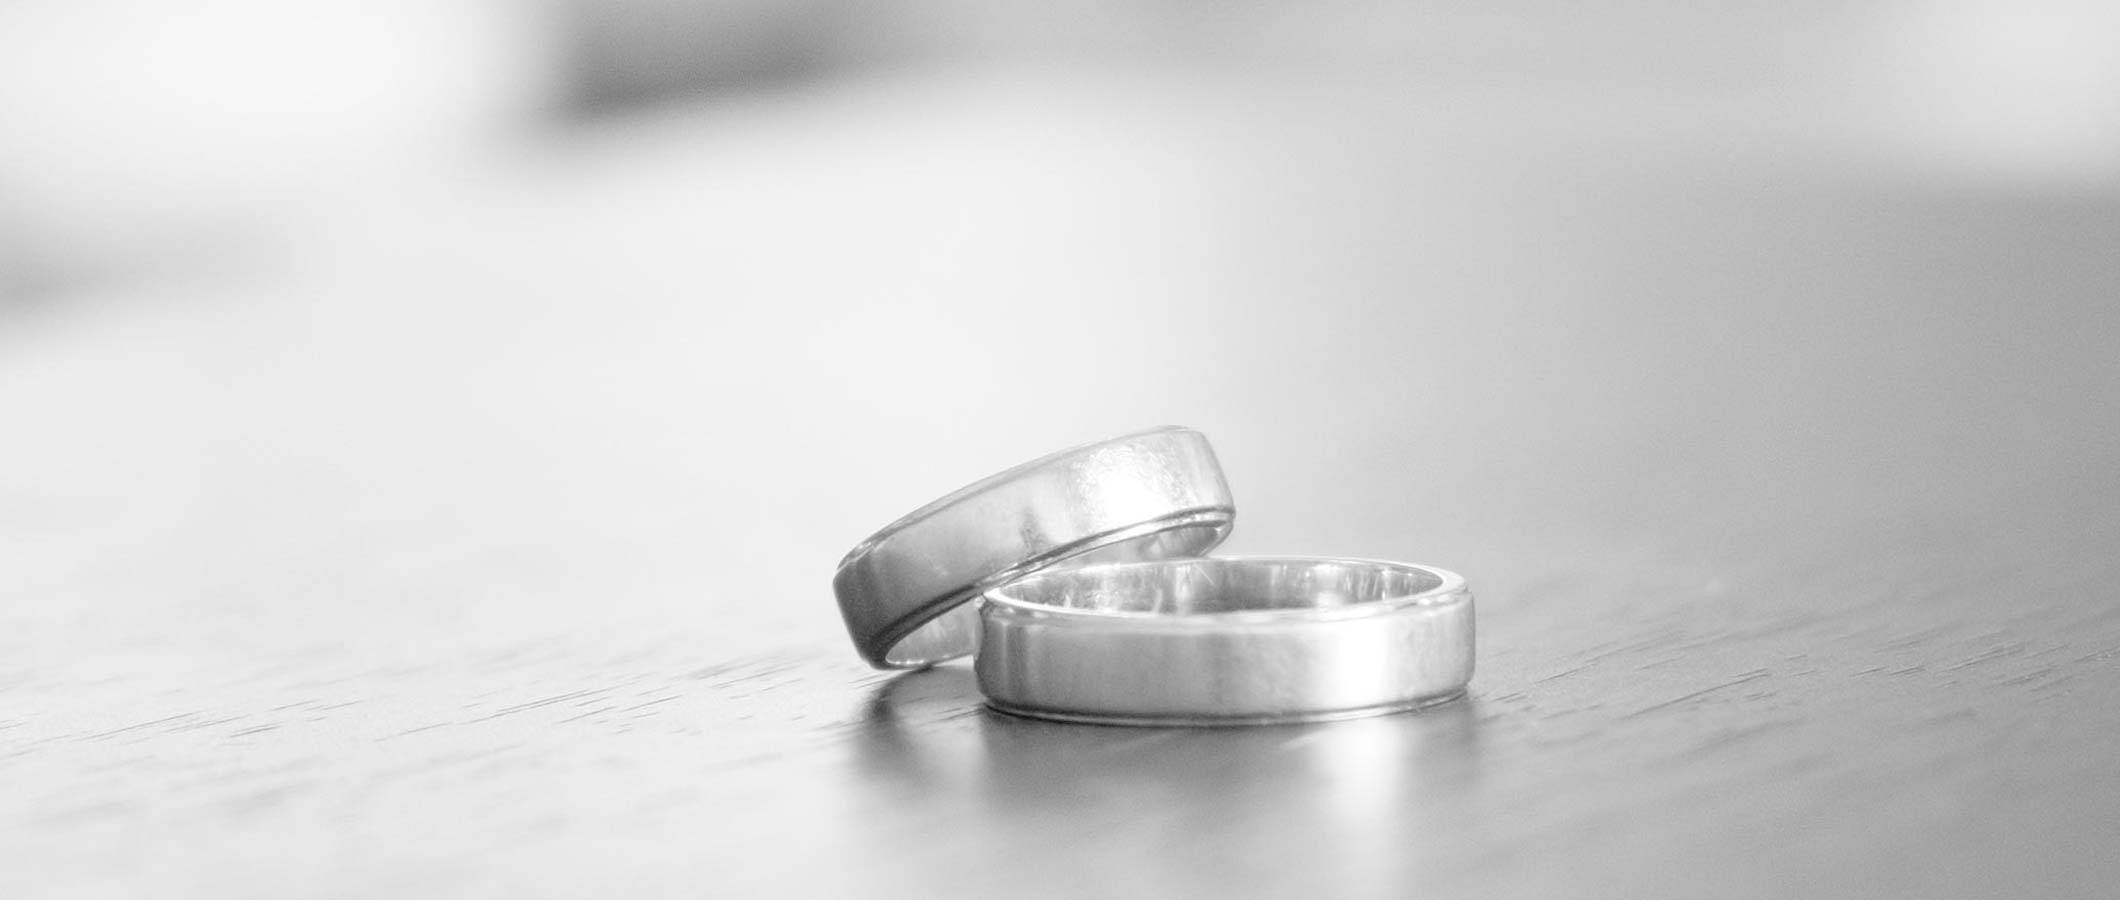 Individually crafted Wedding Rings: The Right Investment